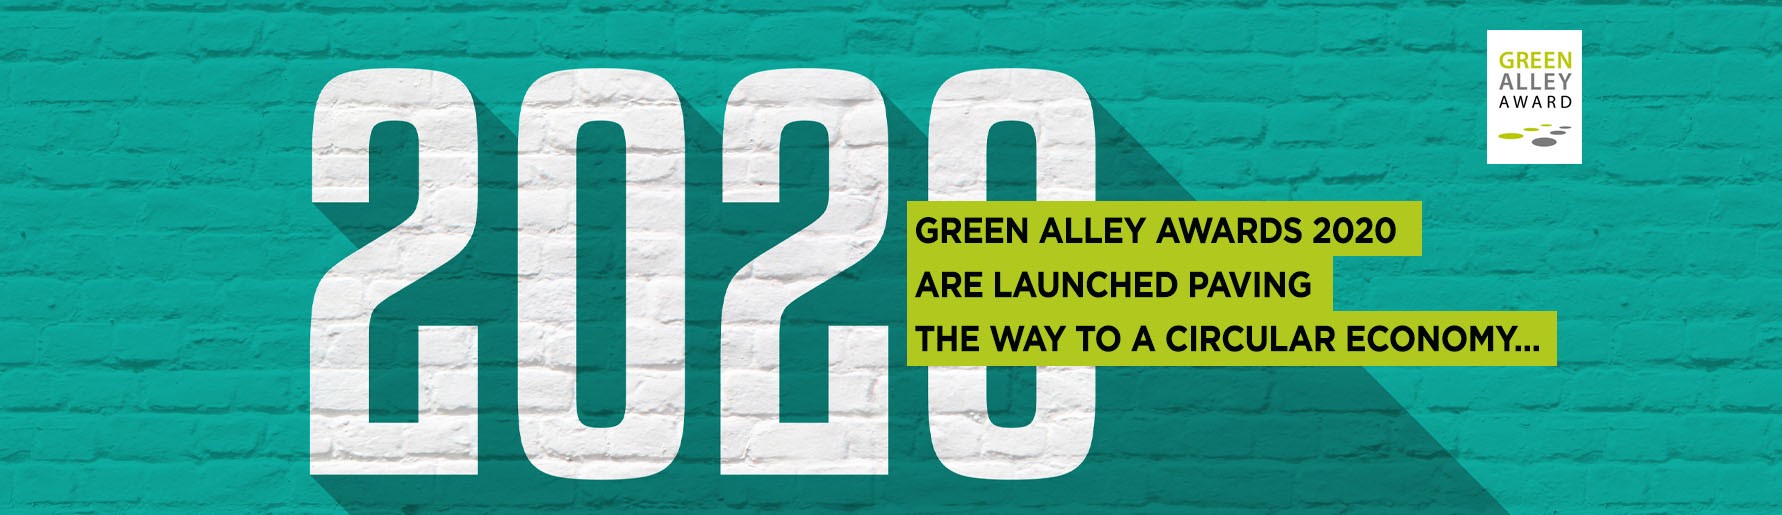 img-erp-ie-green-alley-awards-2020